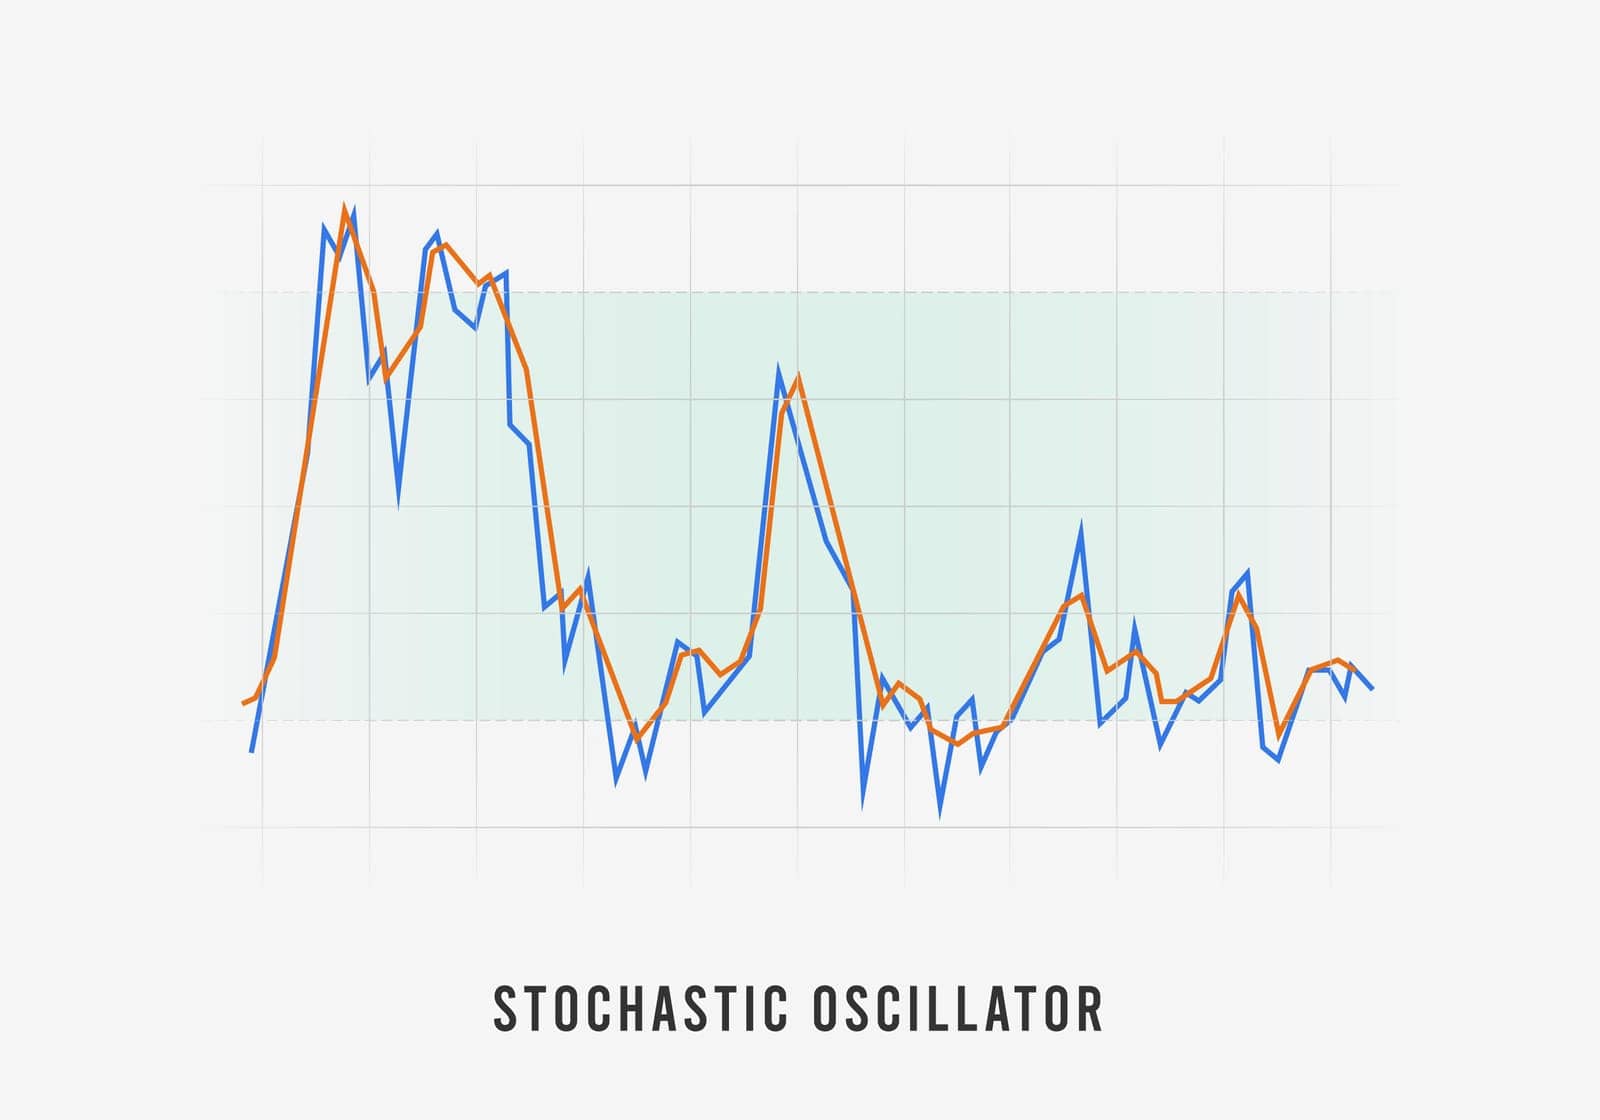 Stochastic Oscillator momentum indicator for stock market technical analysis. Strategies for trading and investment. Forex and cryptocurrency exchange market. Vector illustration concept.